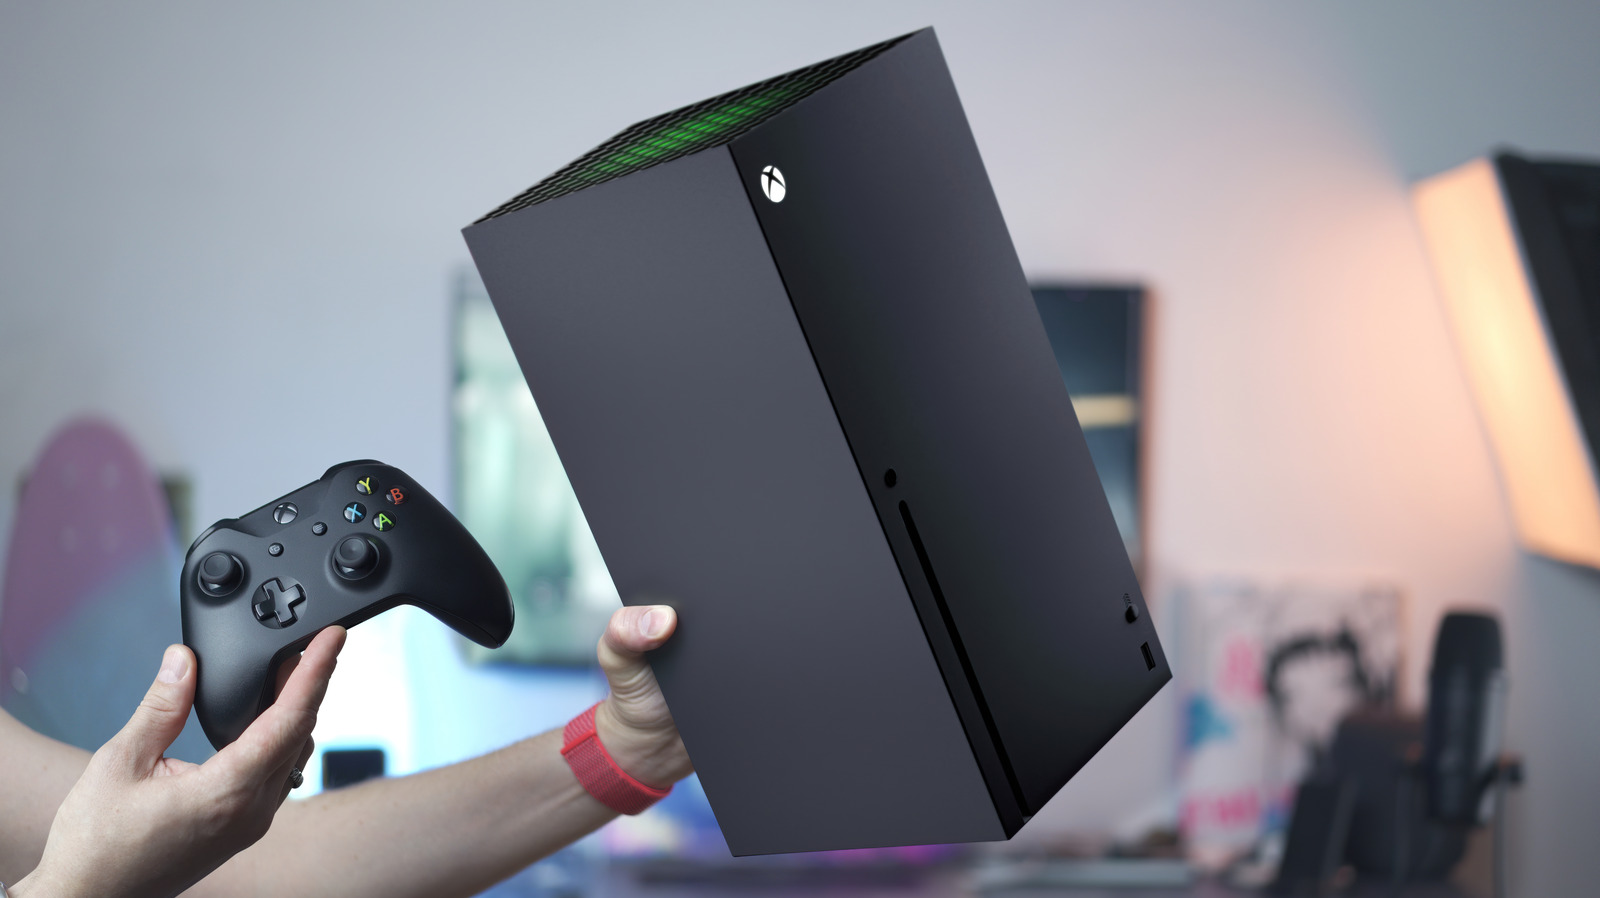 9 Things Xbox Series X Can Do That The PlayStation 5 Can’t – SlashGear